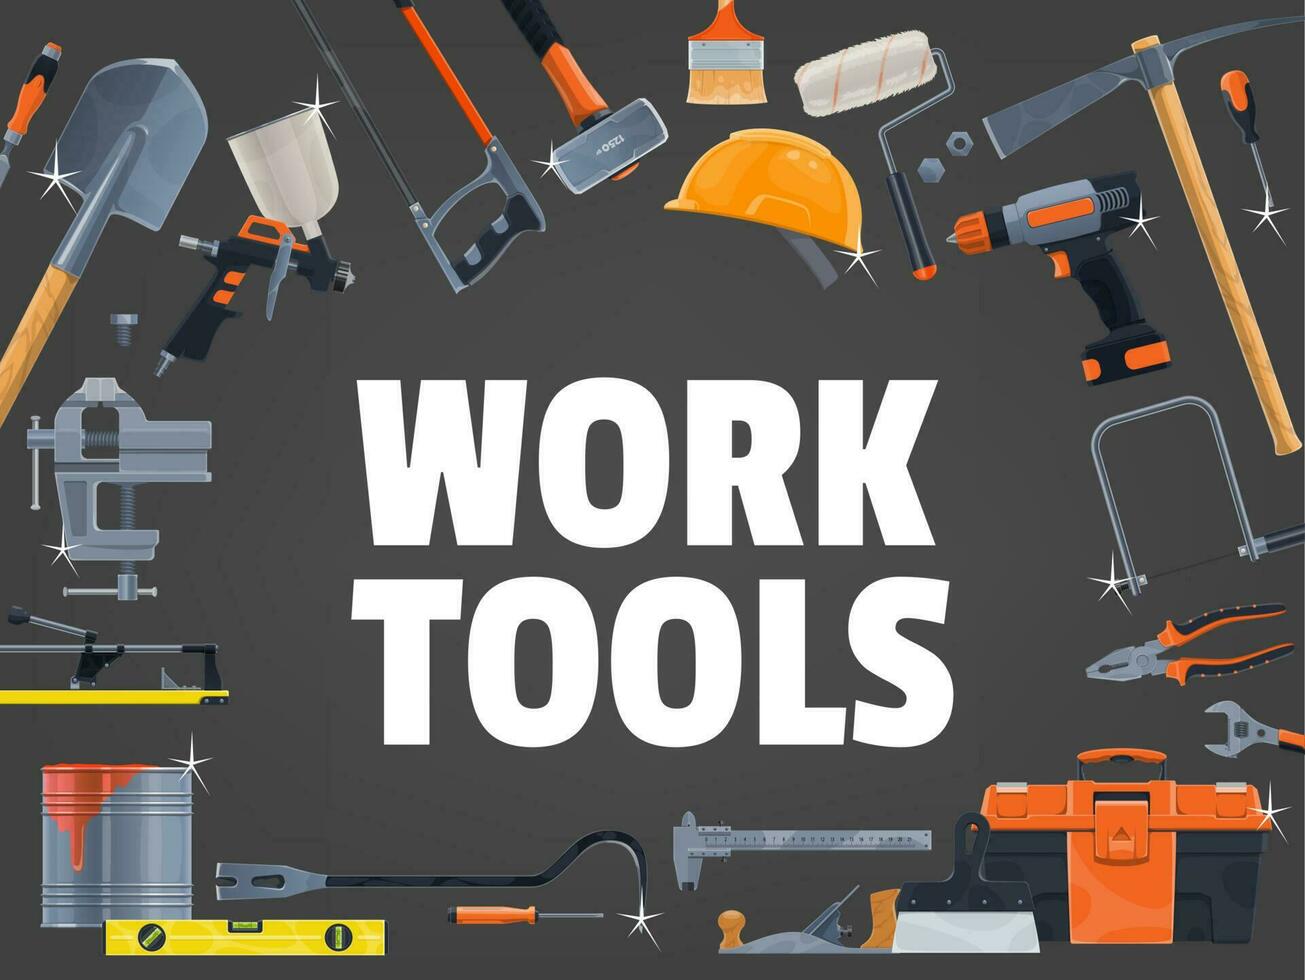 Work tools and equipment toolbox, construction vector